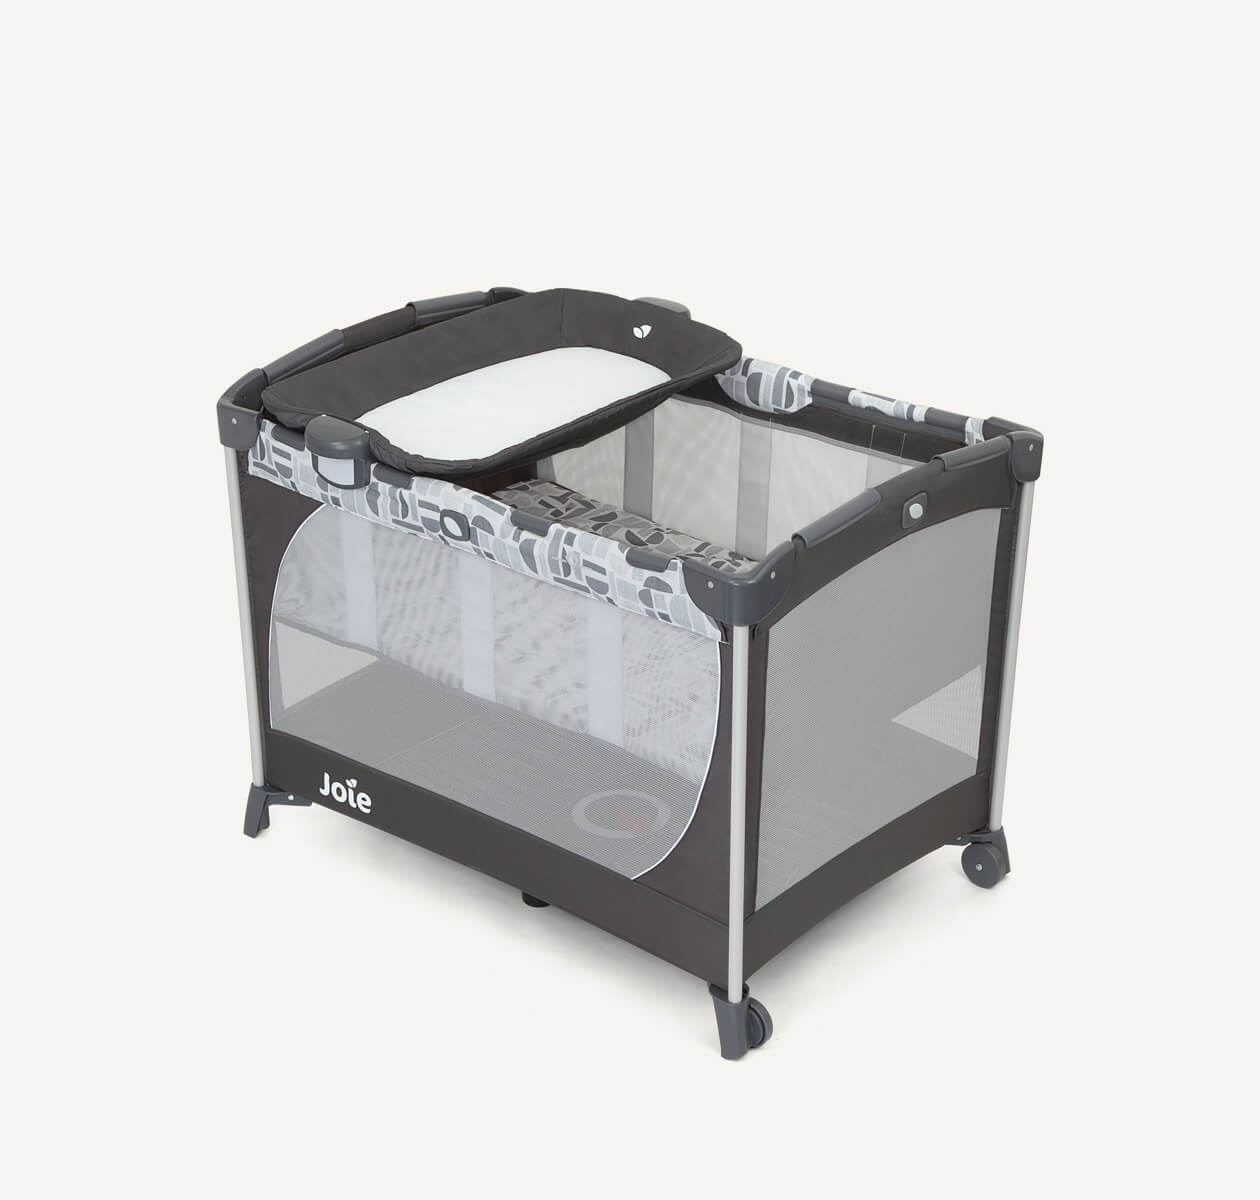 The Joie travel cot commuter change in grey and blue pattern with a bassinet and changer at a left angle.